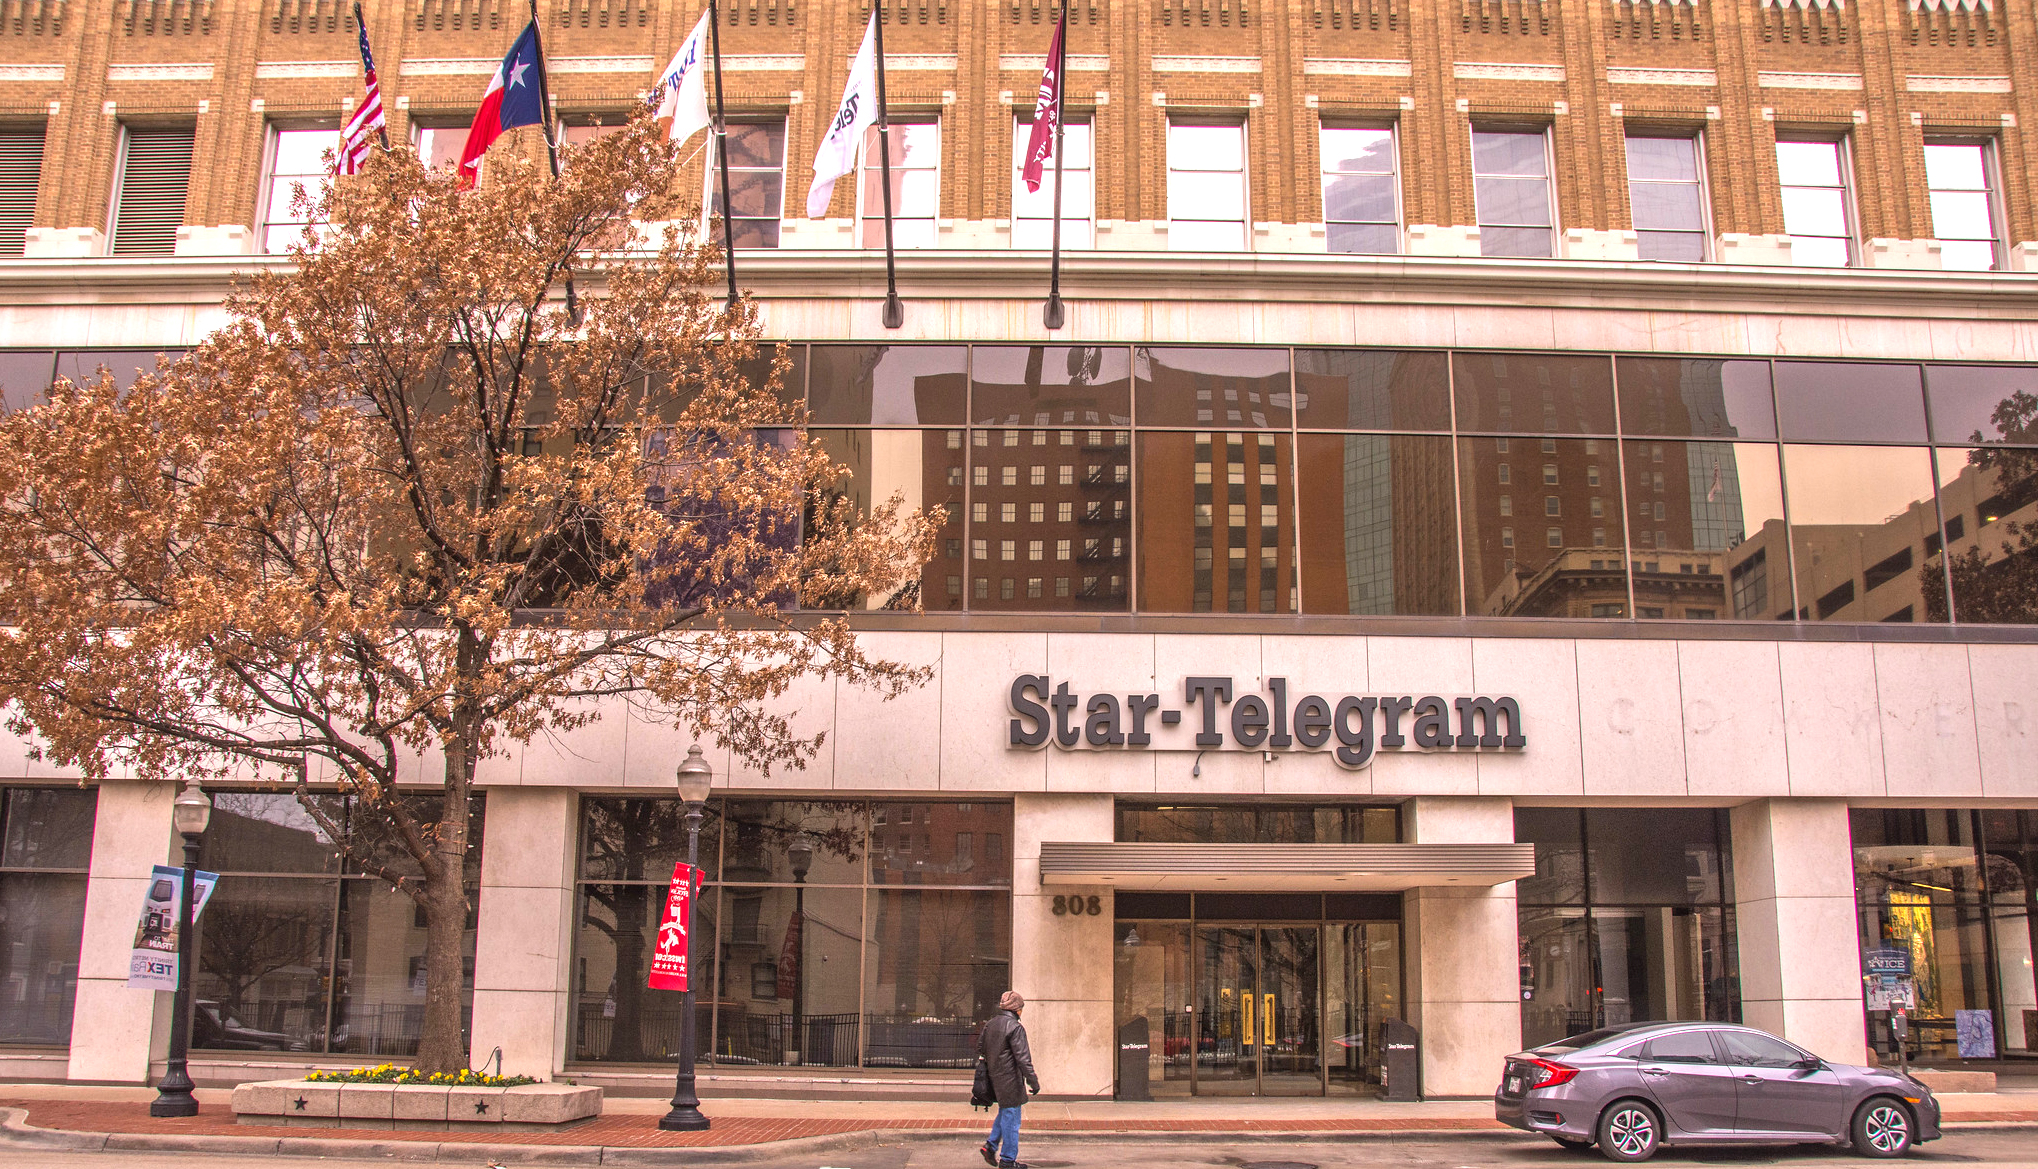 A lone person approaches the glass front doors of the Fort Worth Star-Telegram building in downtown Forth Worth, Texas. A parked car and a yellow autumnal tree stand outside.